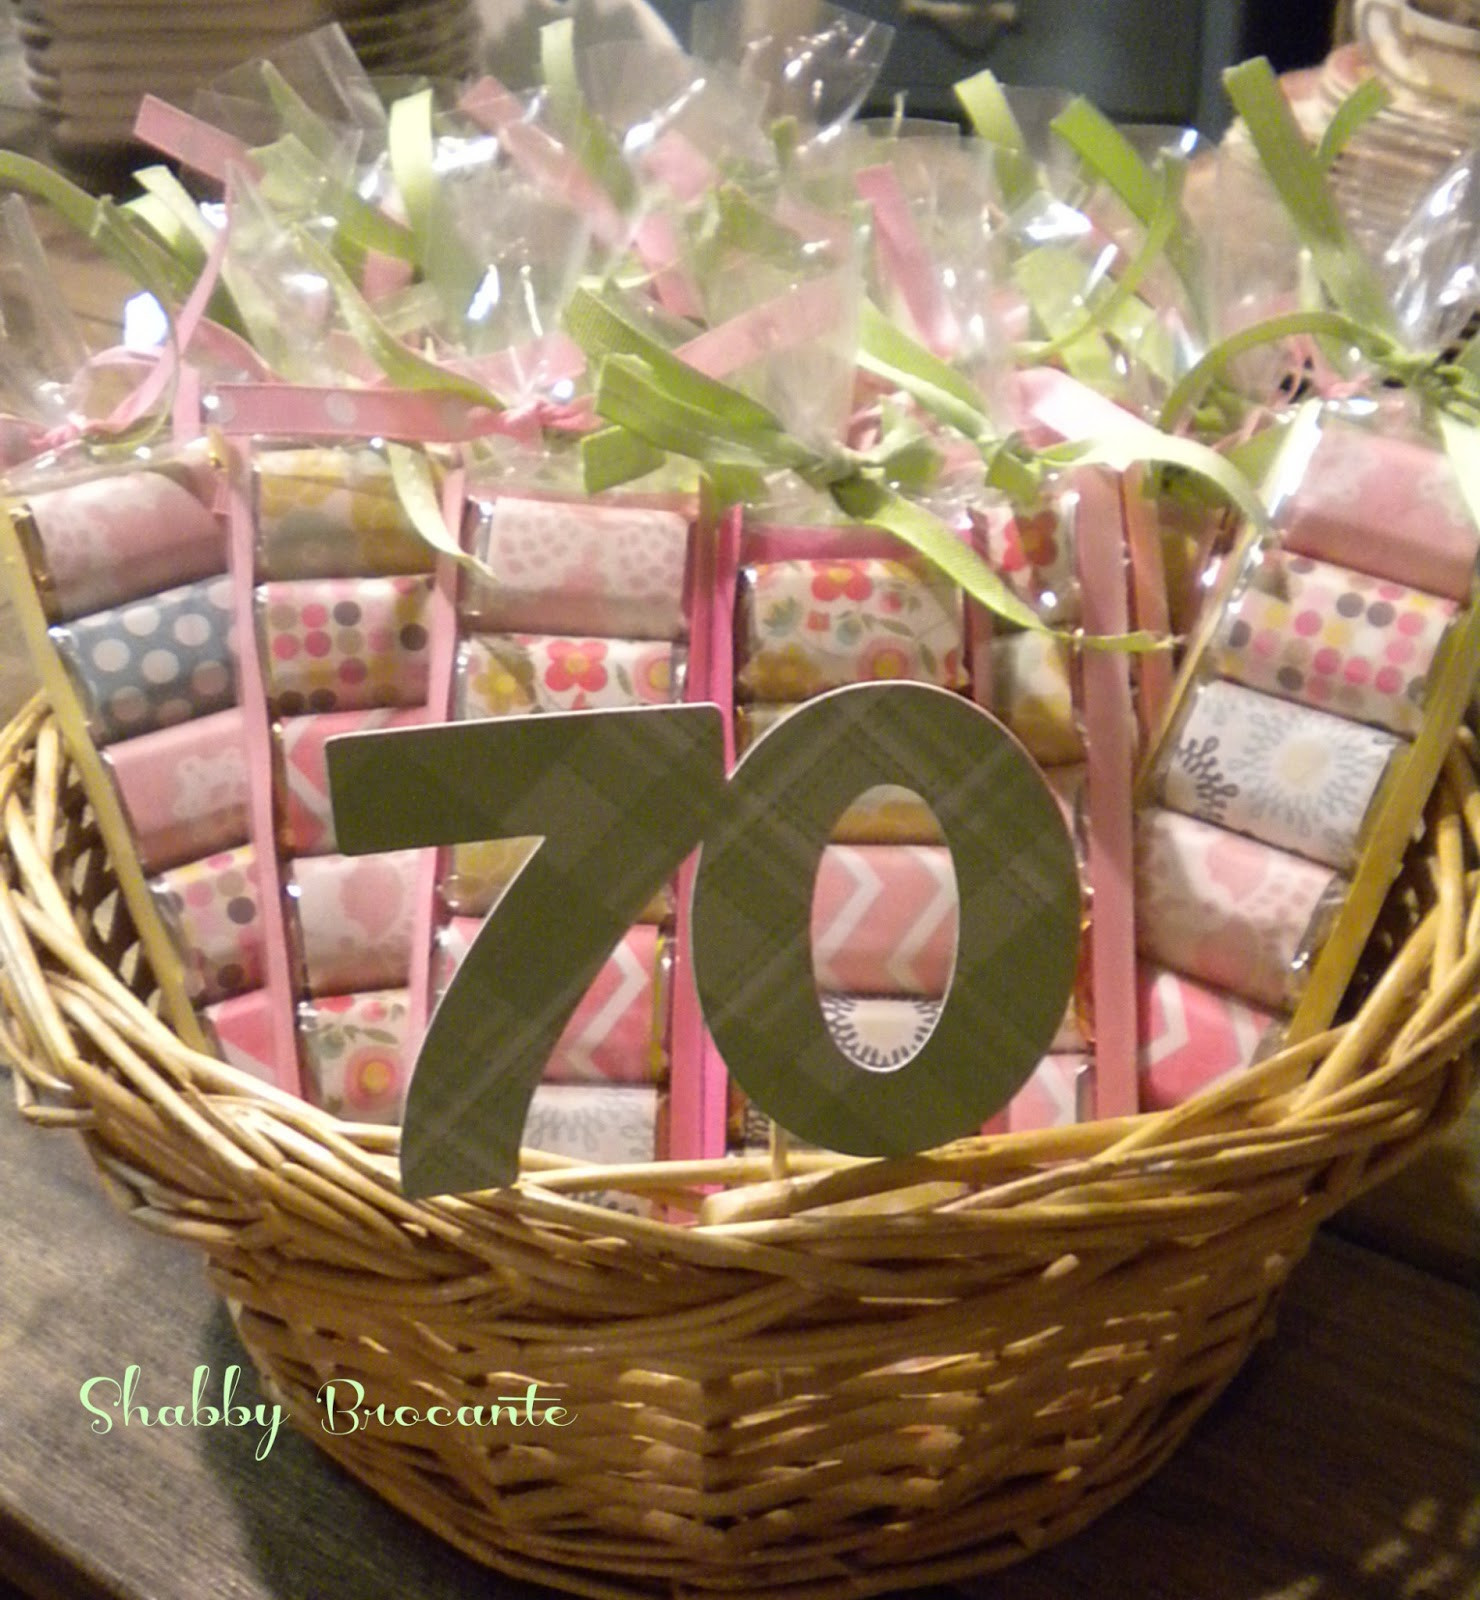 Best ideas about Adult Party Gifts
. Save or Pin Shabby Brocante Hersey s Adult Party Favors Now.